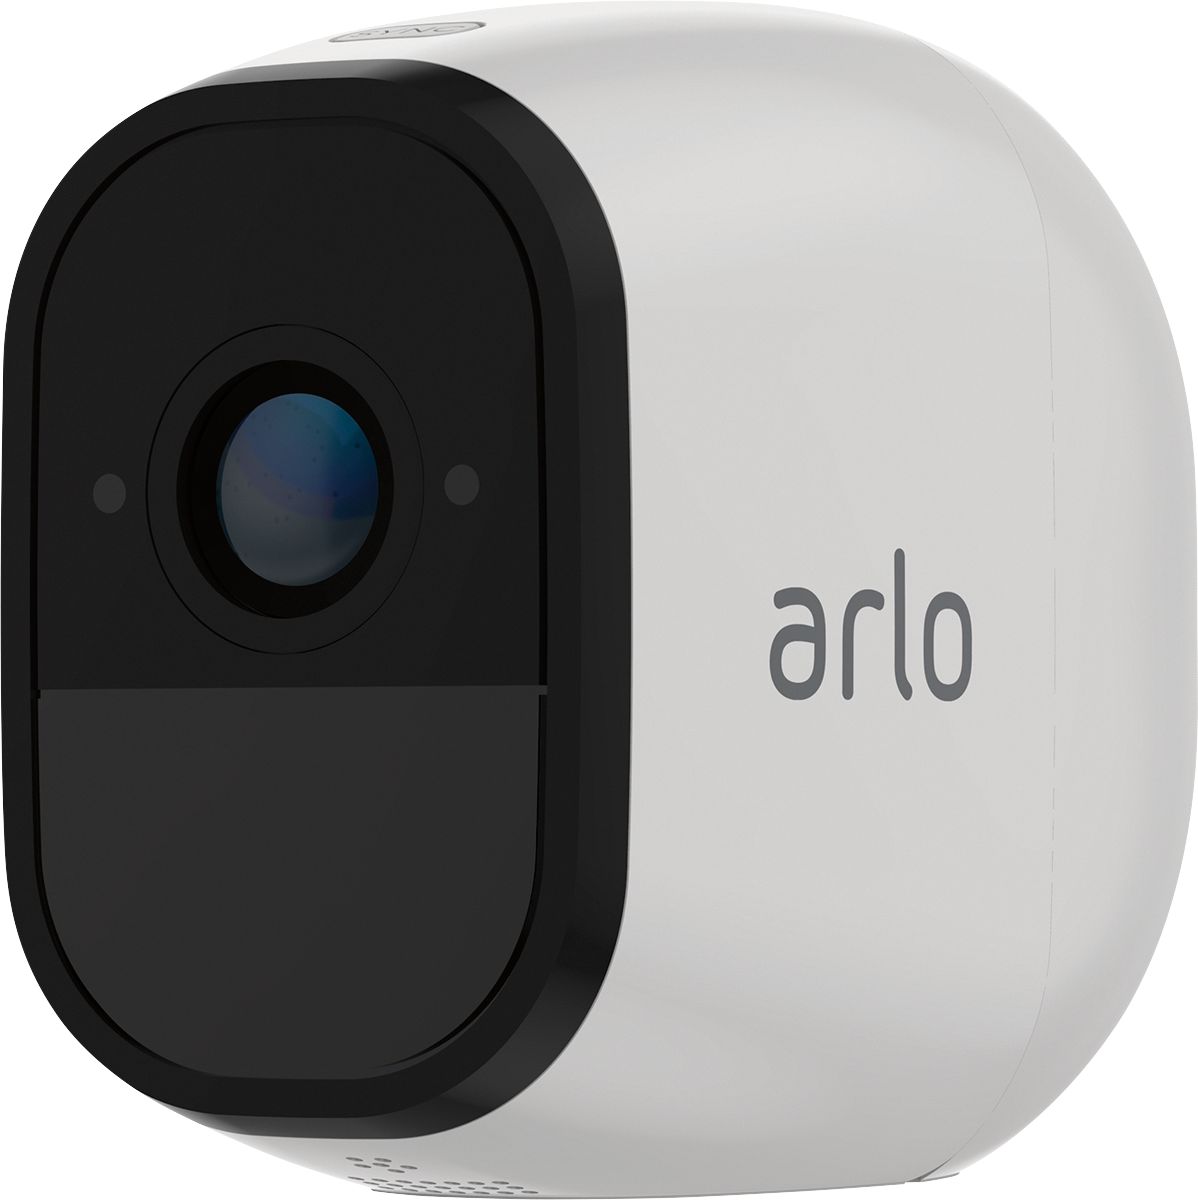 determine if you have Arlo Pro or Arlo 